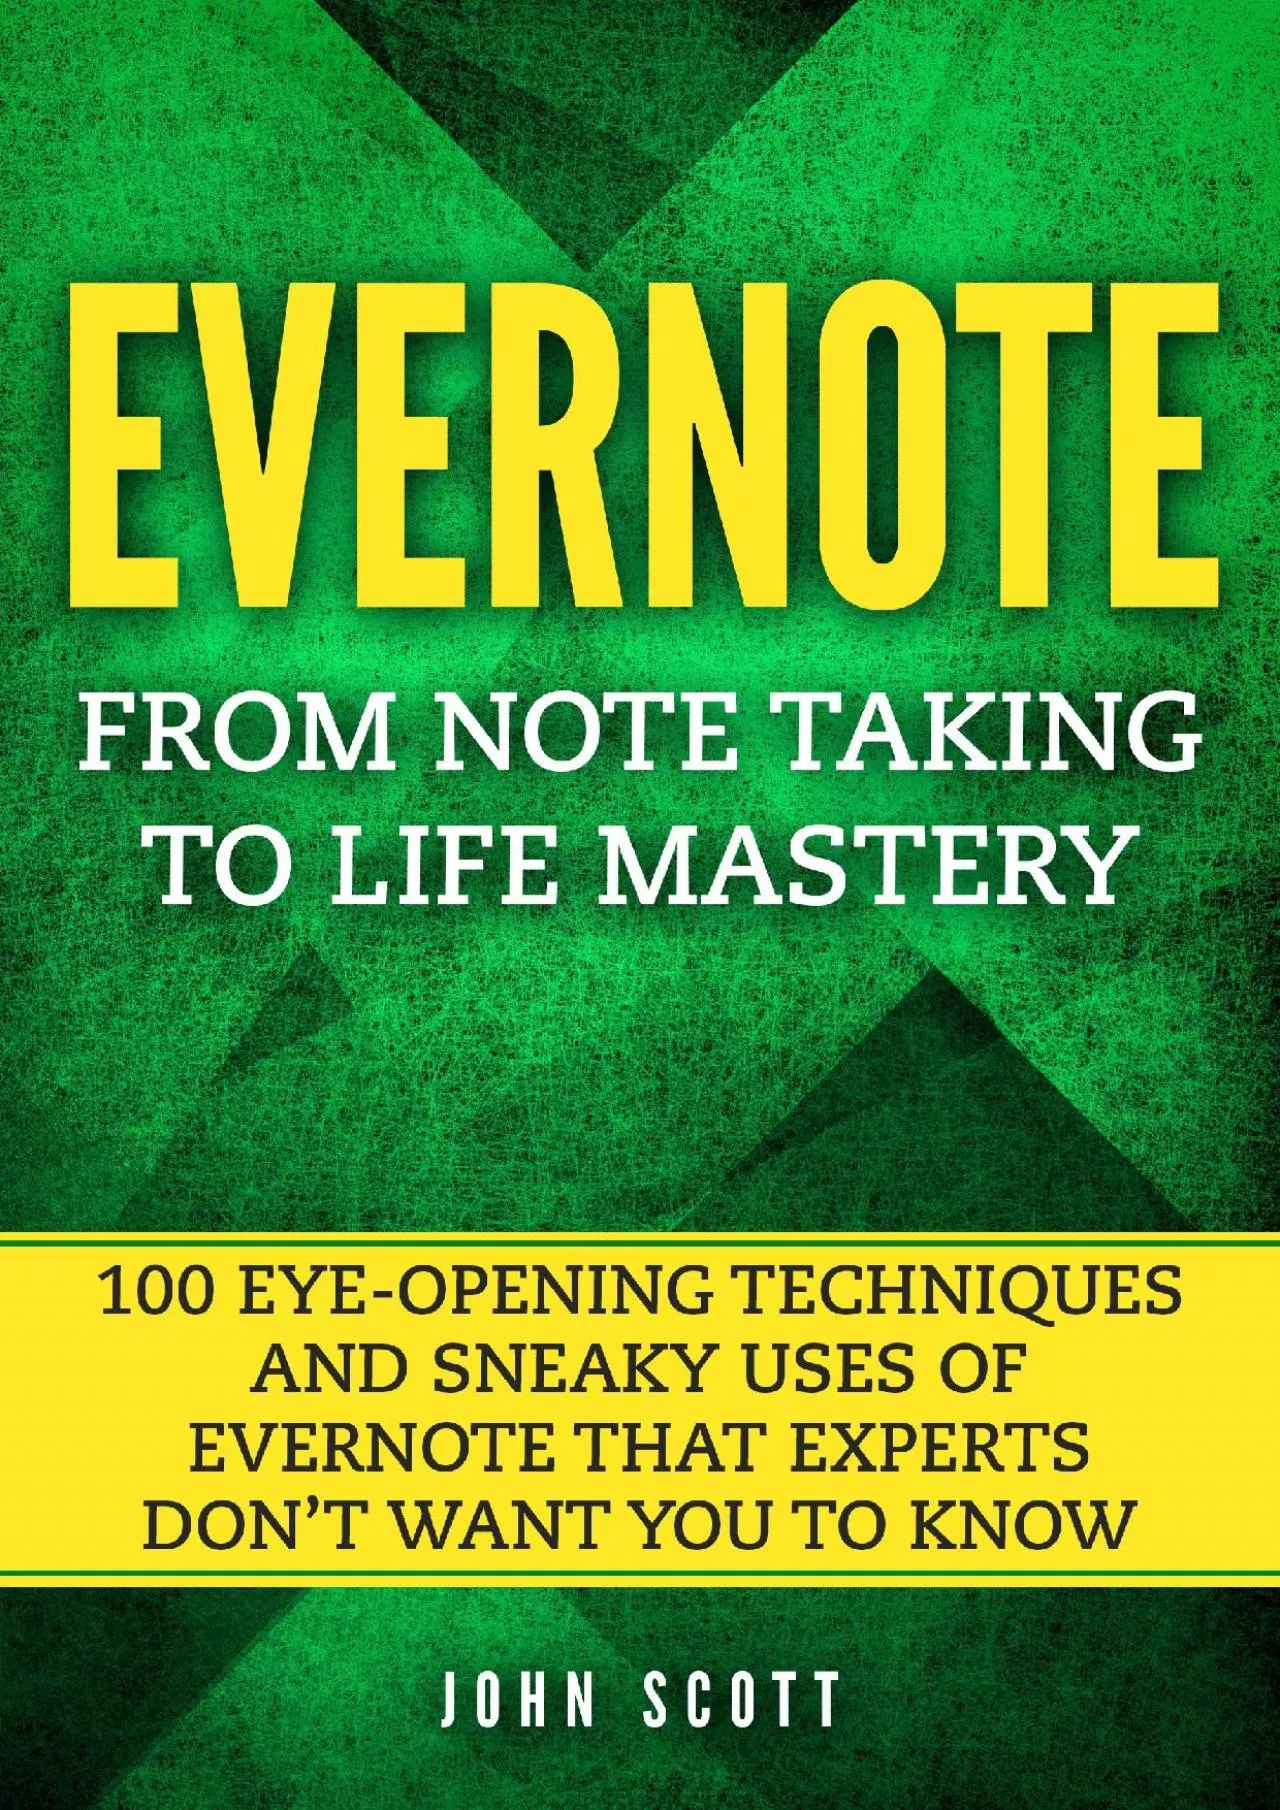 (BOOS)-Evernote: From Note Taking to Life Mastery: 100 Eye-Opening Techniques and Sneaky